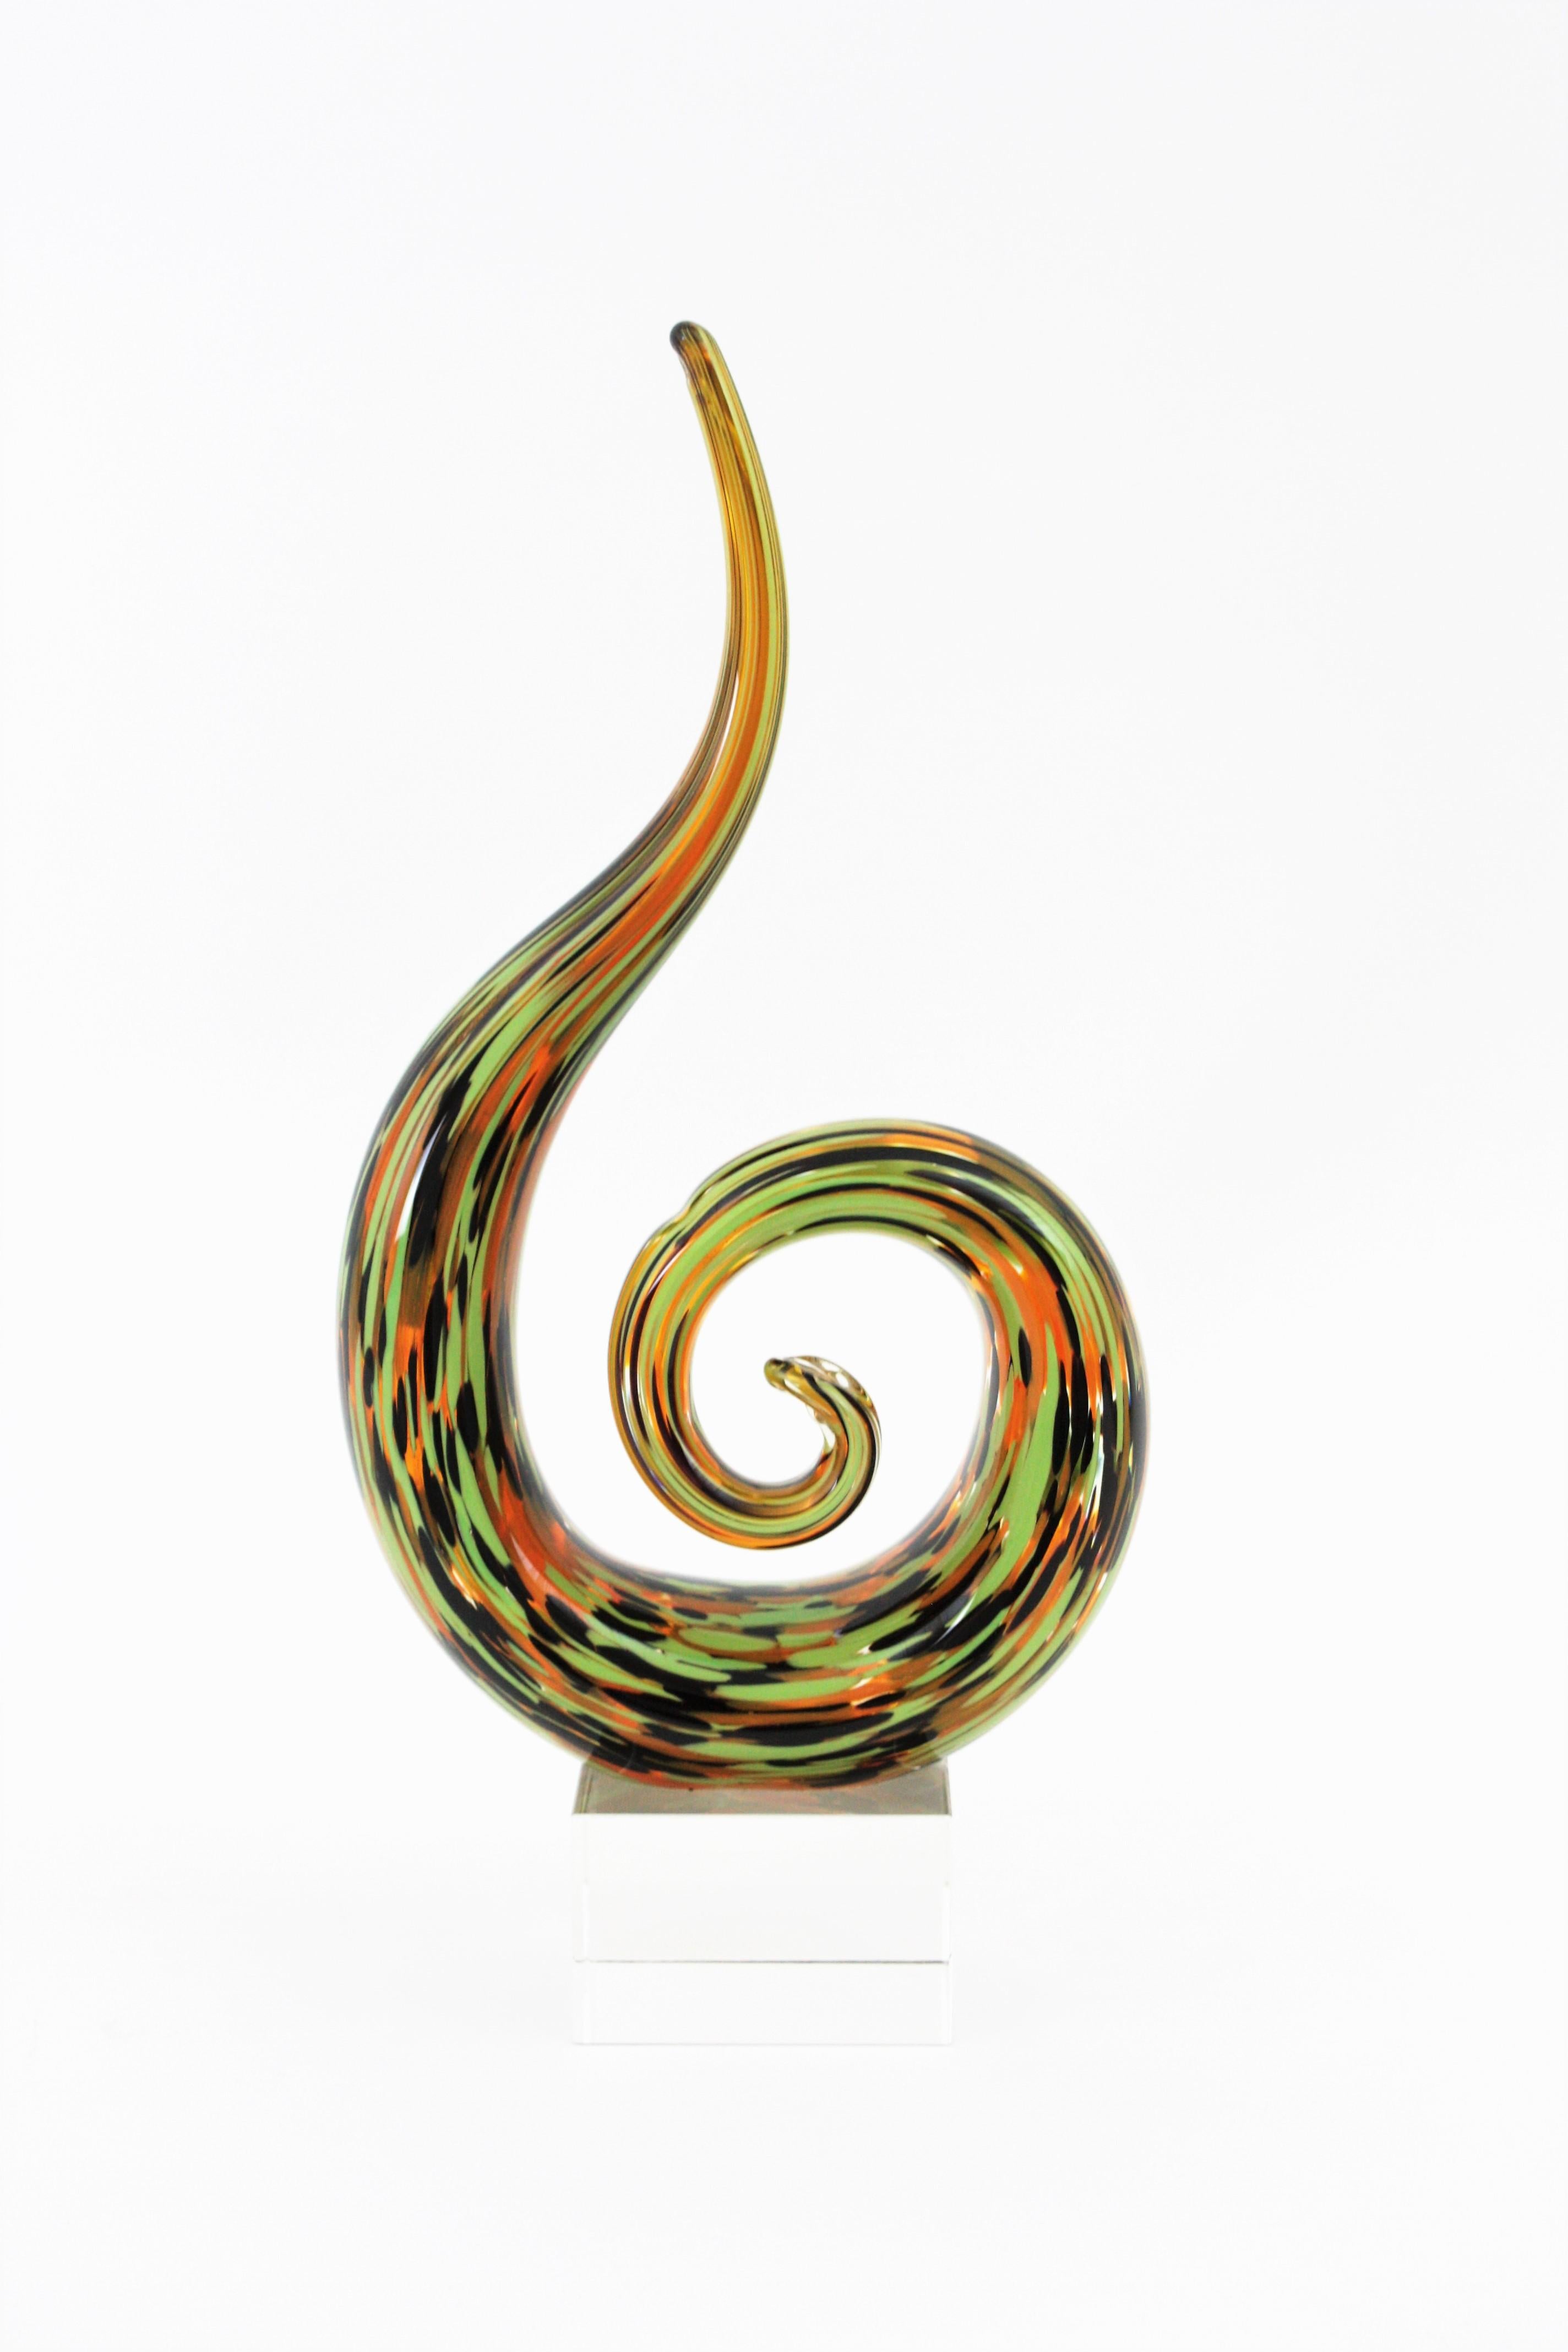 Beautiful abstract Murano blown glass sculpture. Artist unknown. Italy, 1960s
This art glass paperweight sculpture has an eye-catching design with spiral shape standing on a clear glass cube pedestal. It is made of clear glass with murrine